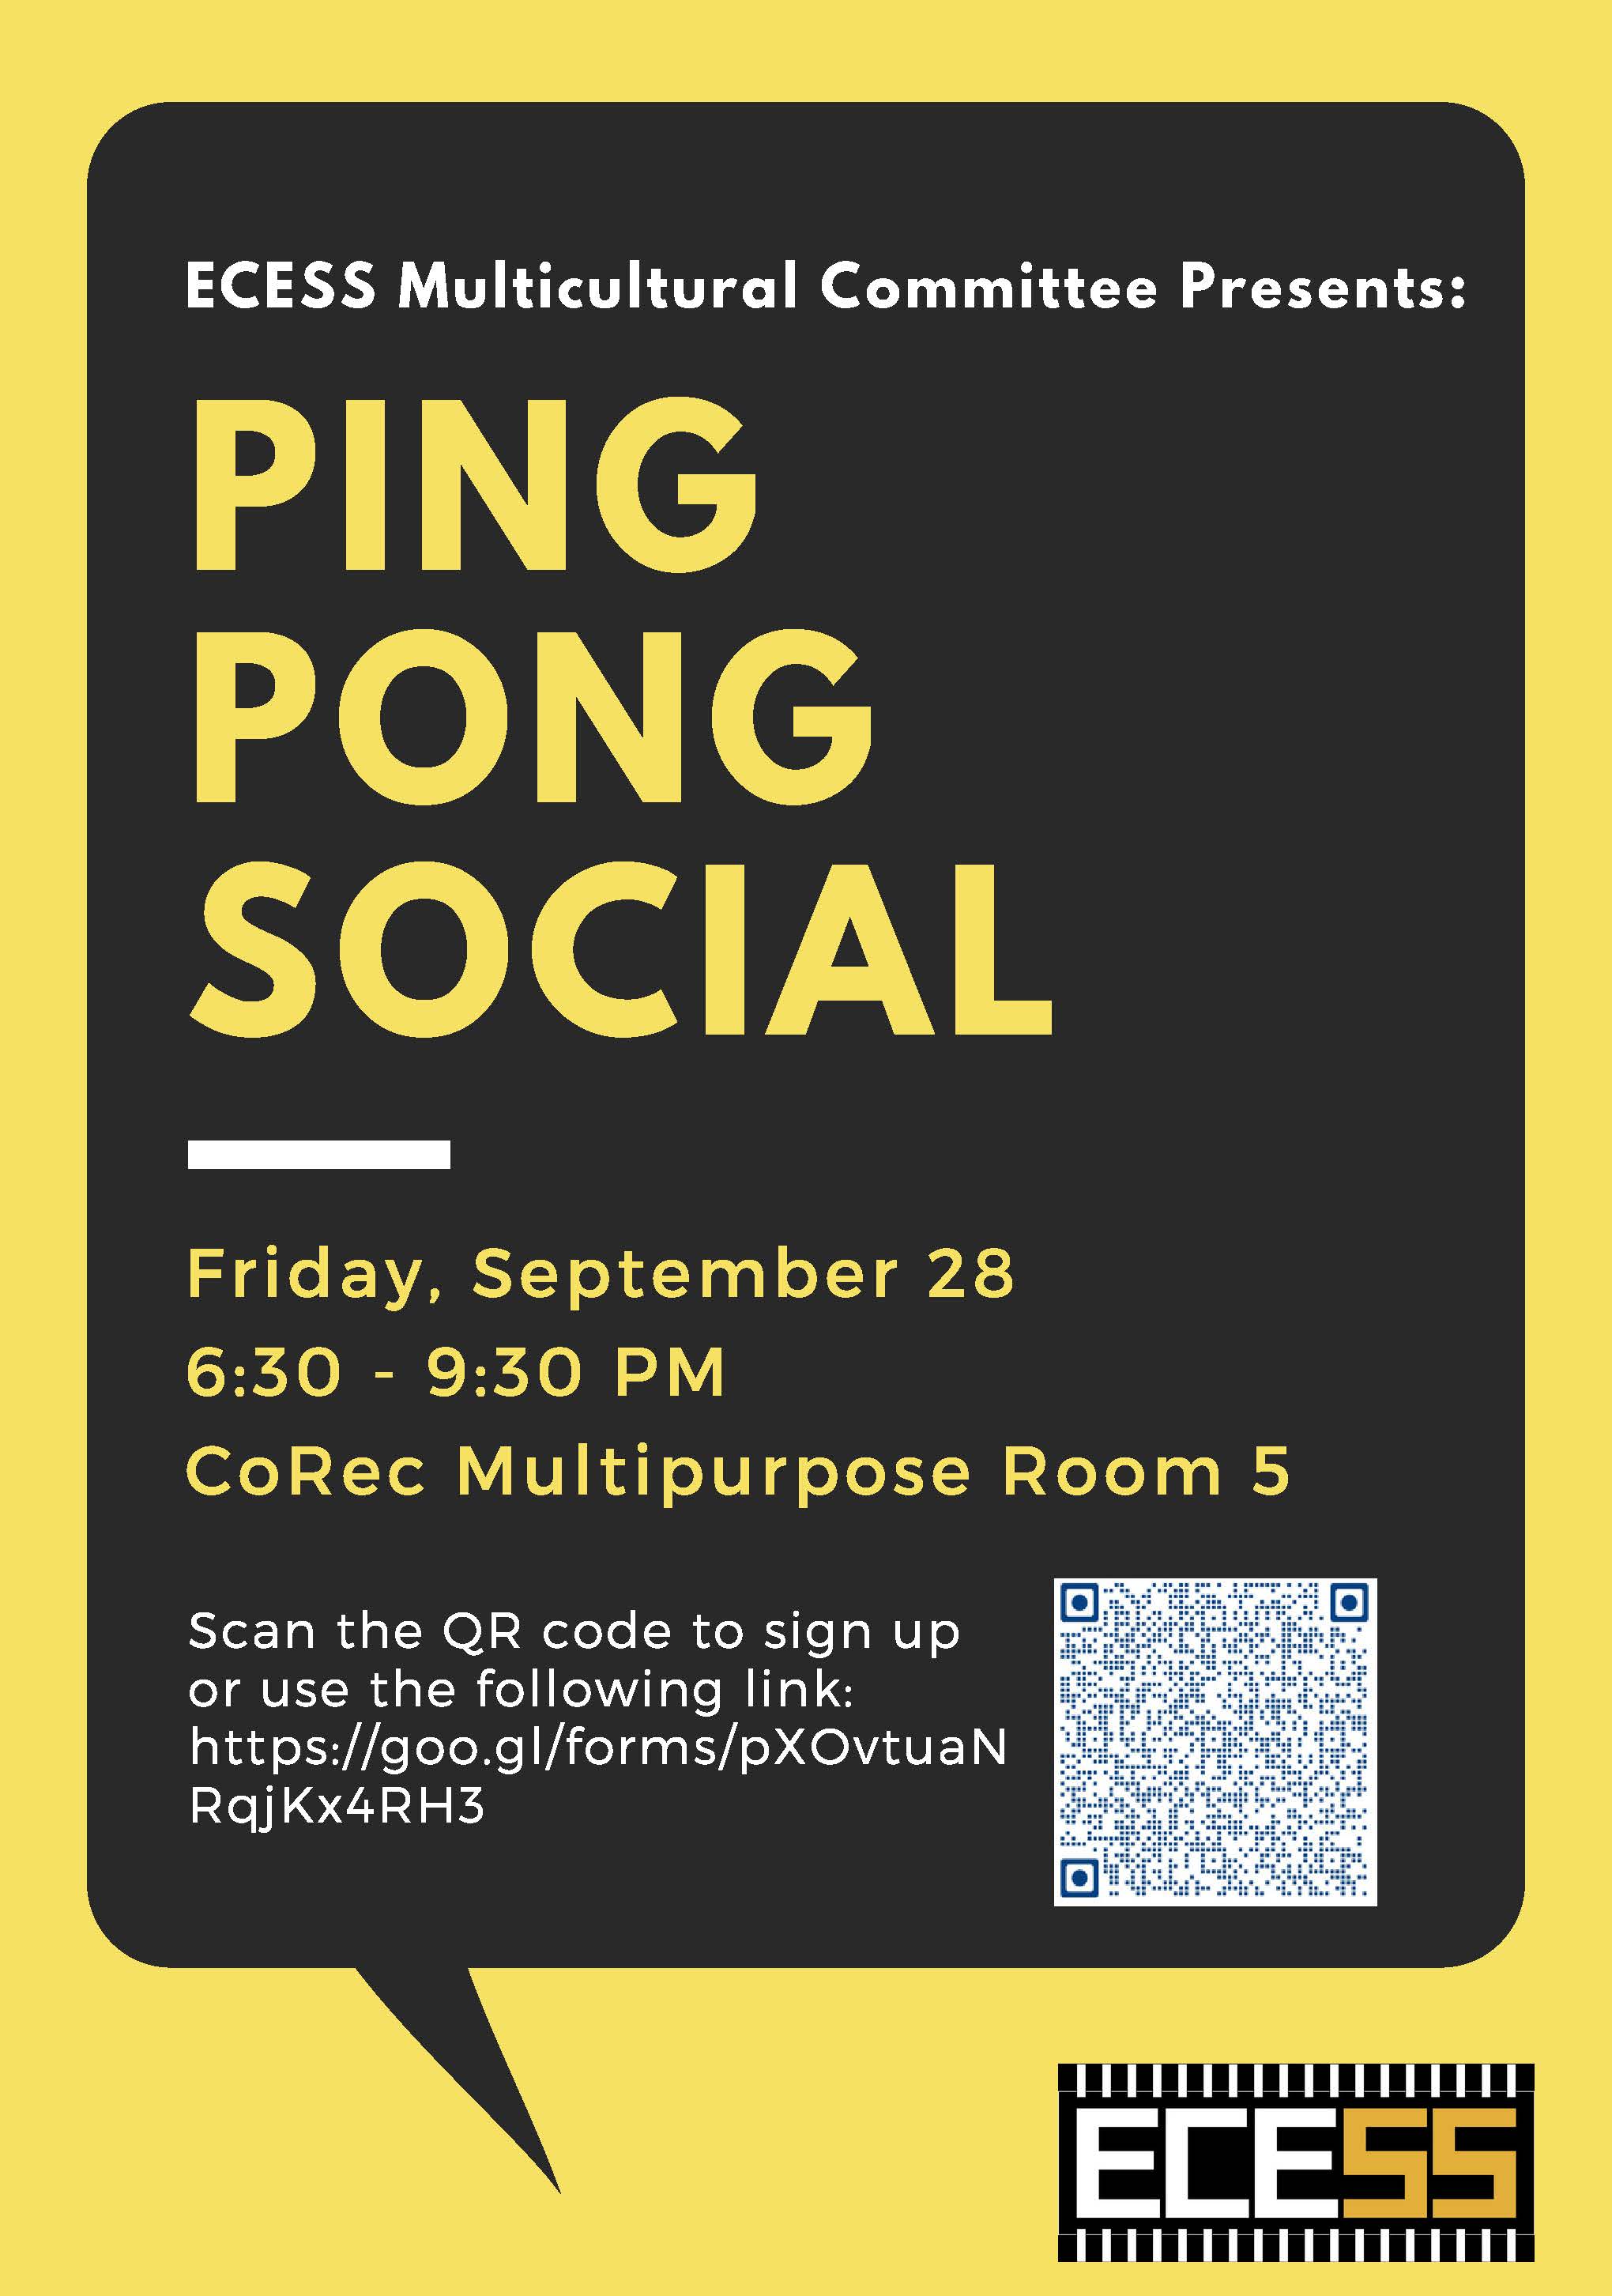 informational flyer for ping pong social